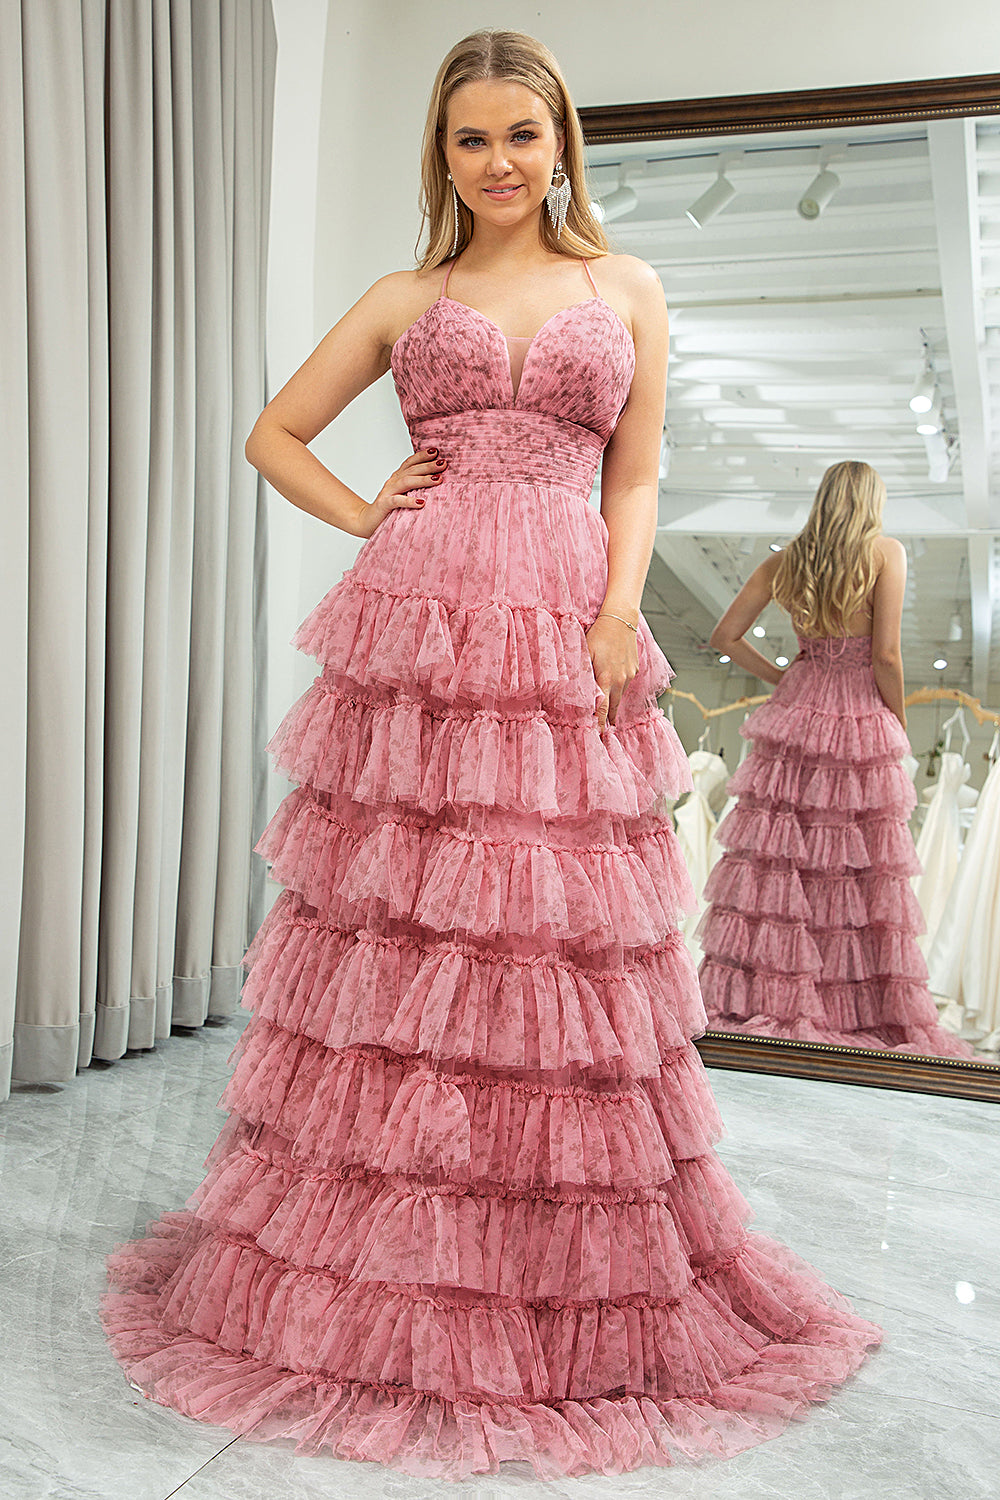 Pink A-Line Spaghetti Straps Layered Tulle Prom Dress with Floral Printed